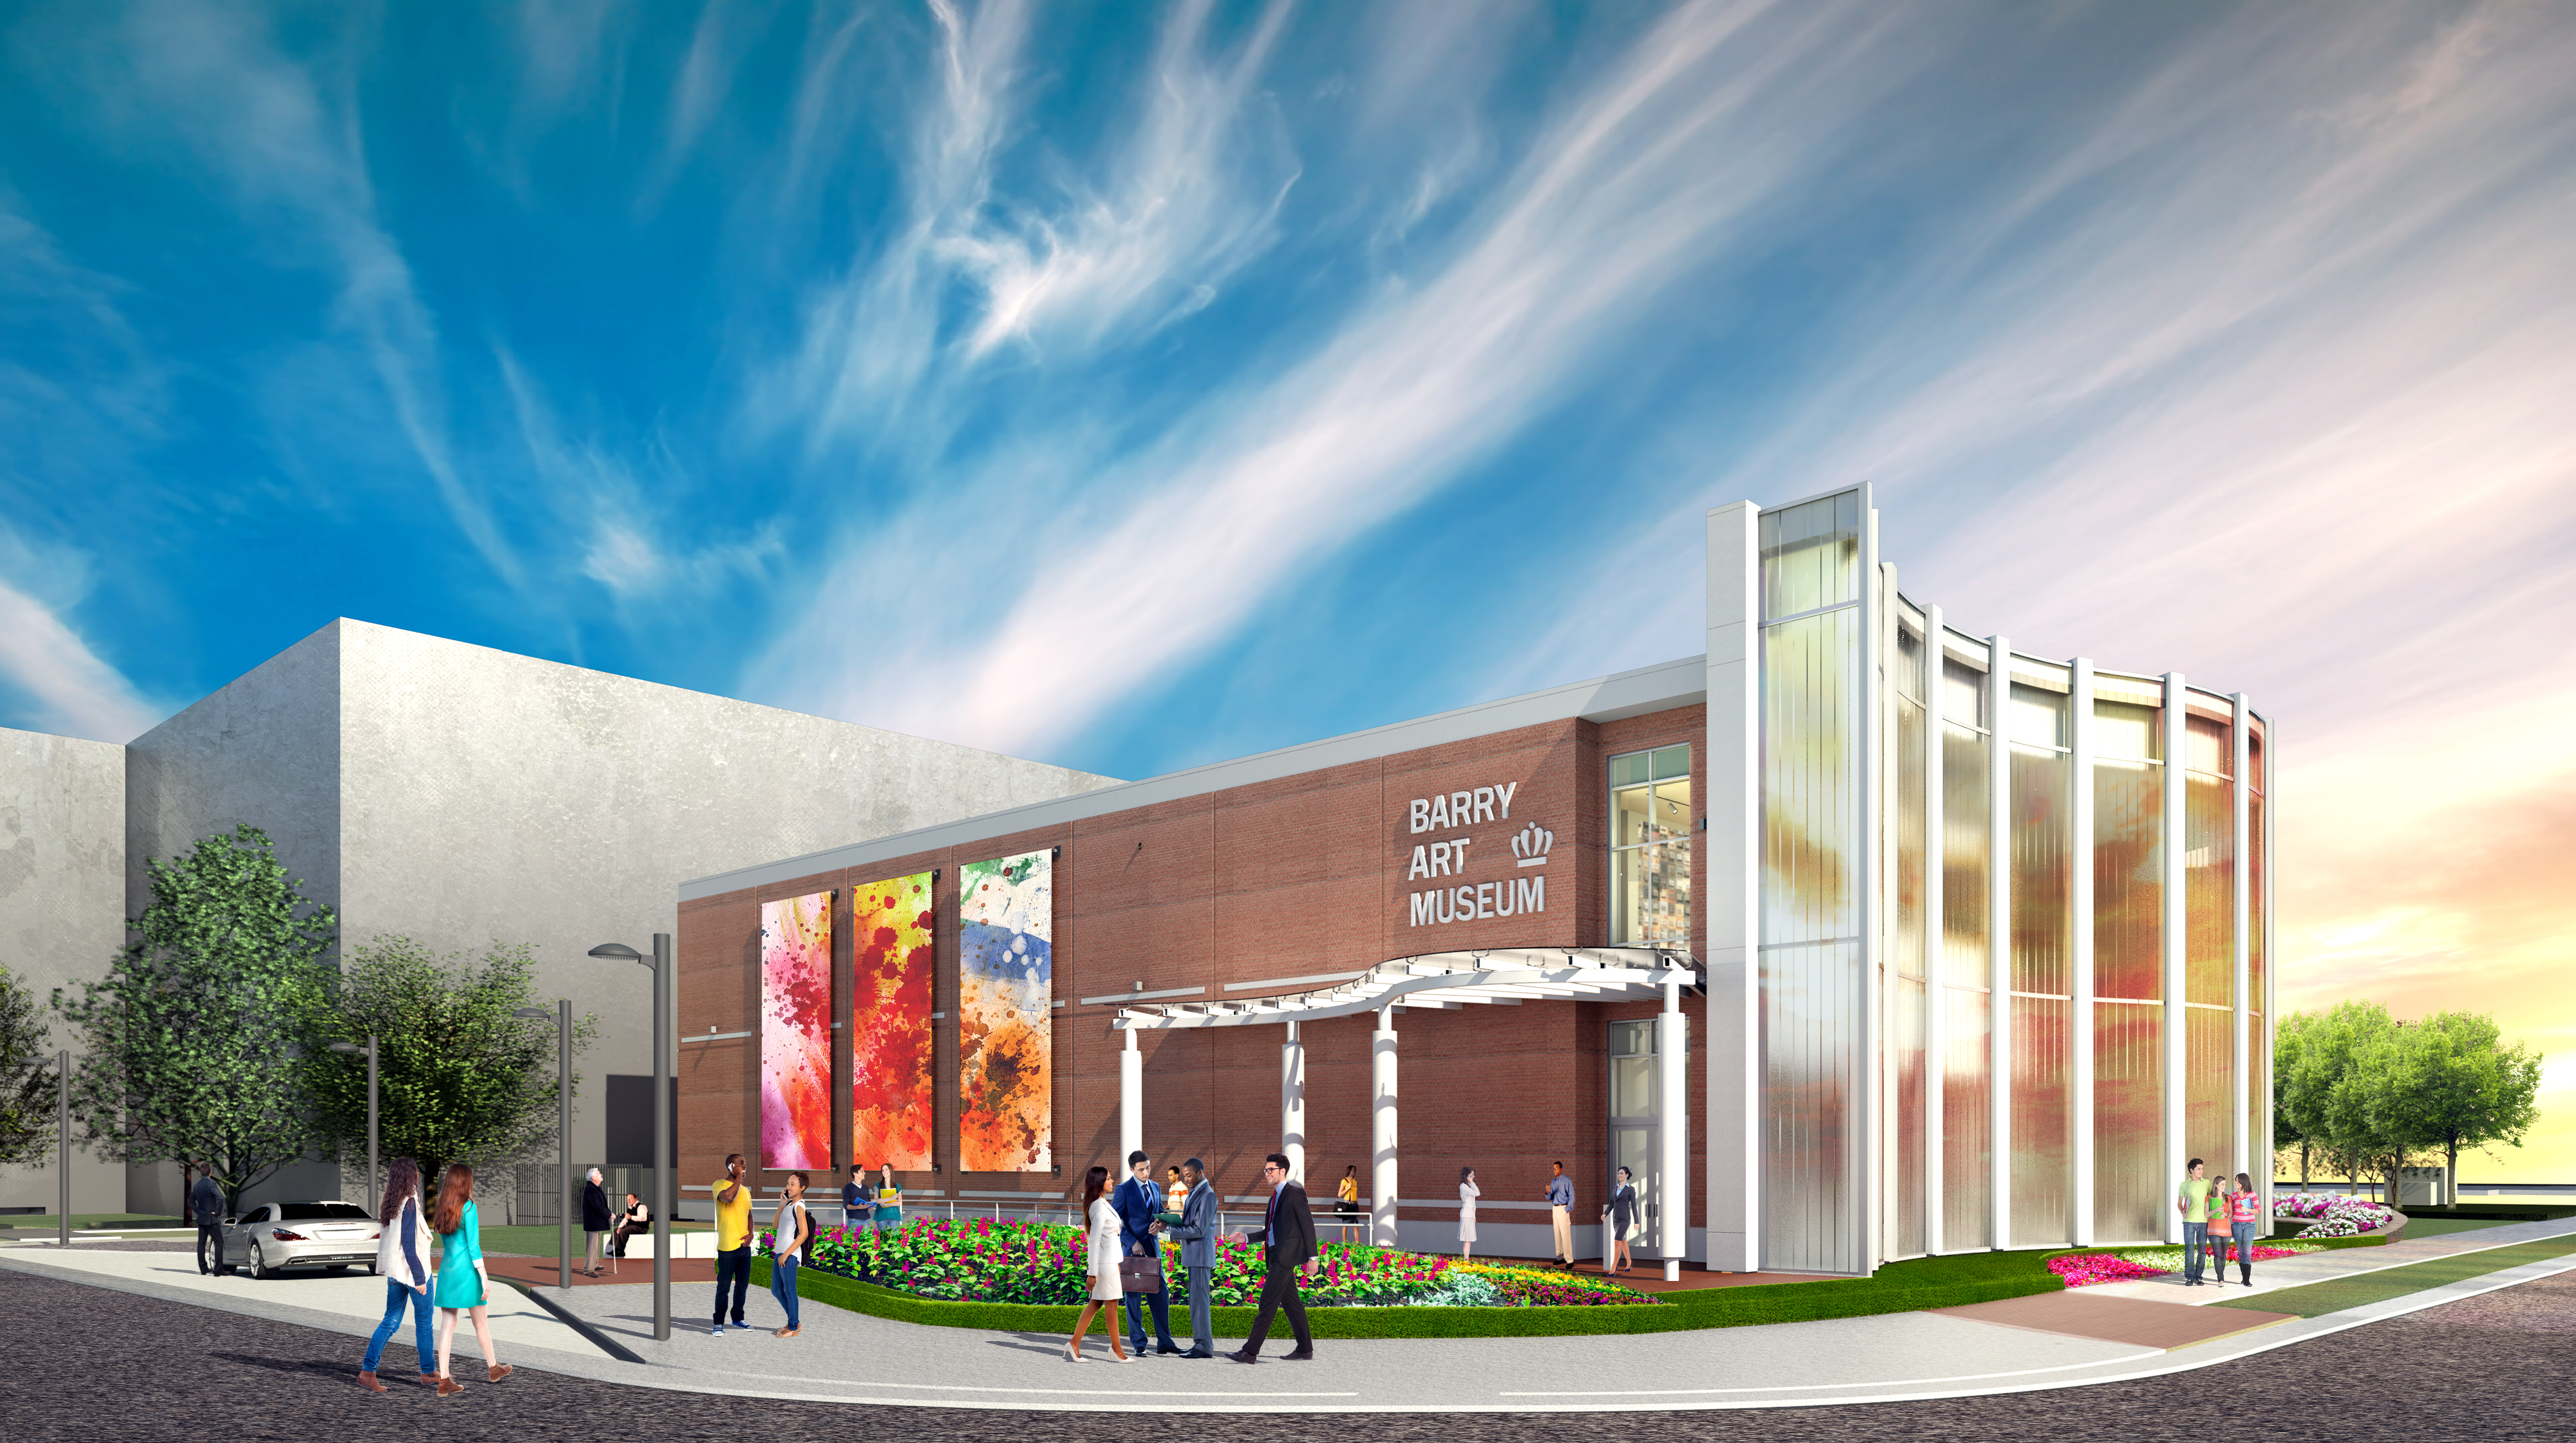 Architect's rendering of the Barry Art Museum